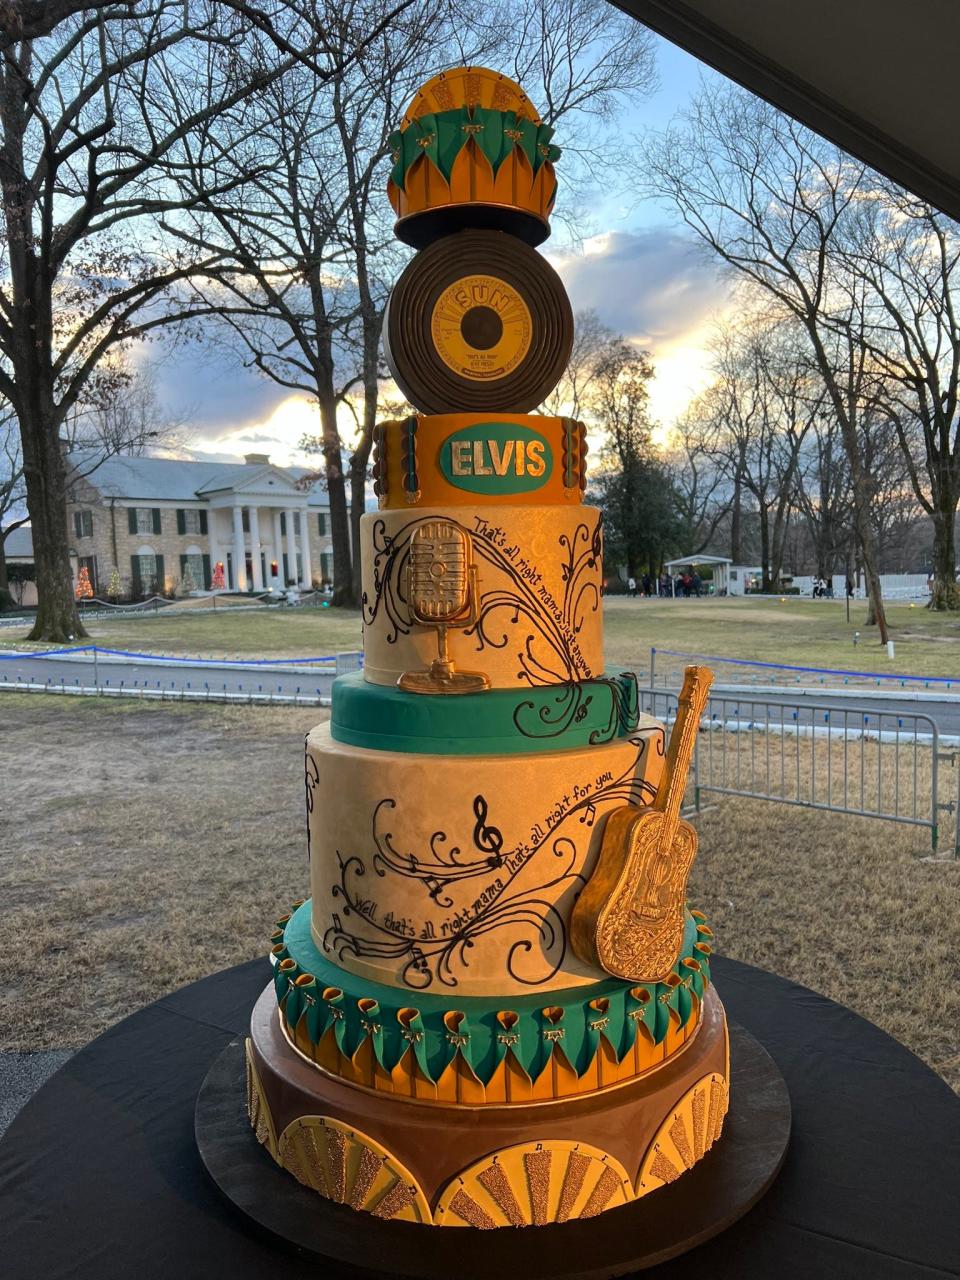 Fans, friends and city officials marked what would have been Elvis Presley's 89th birthday during a ceremony and cake cutting at Graceland in Memphis on Monday, Jan. 8, 2023.